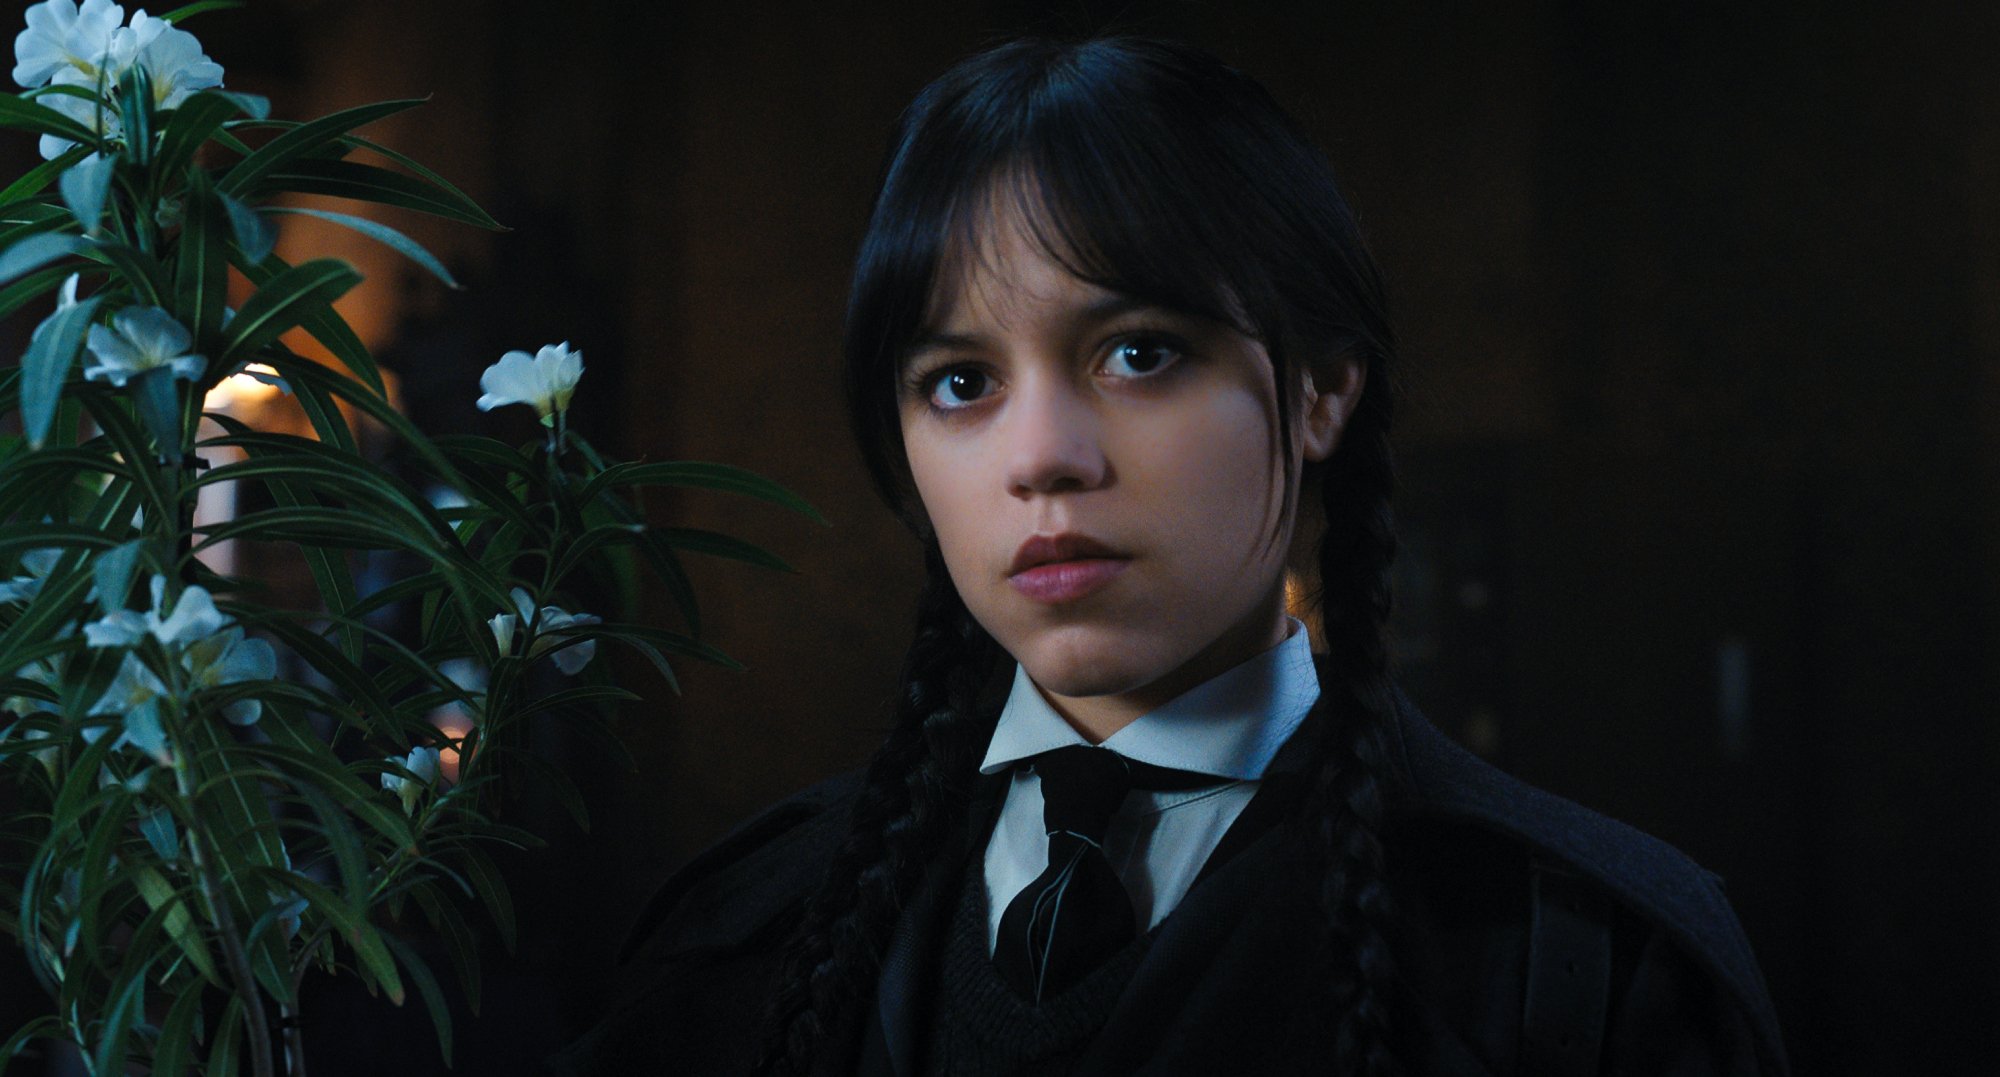 Jenna Ortega as the macabre teen in 'Wednesday' series.